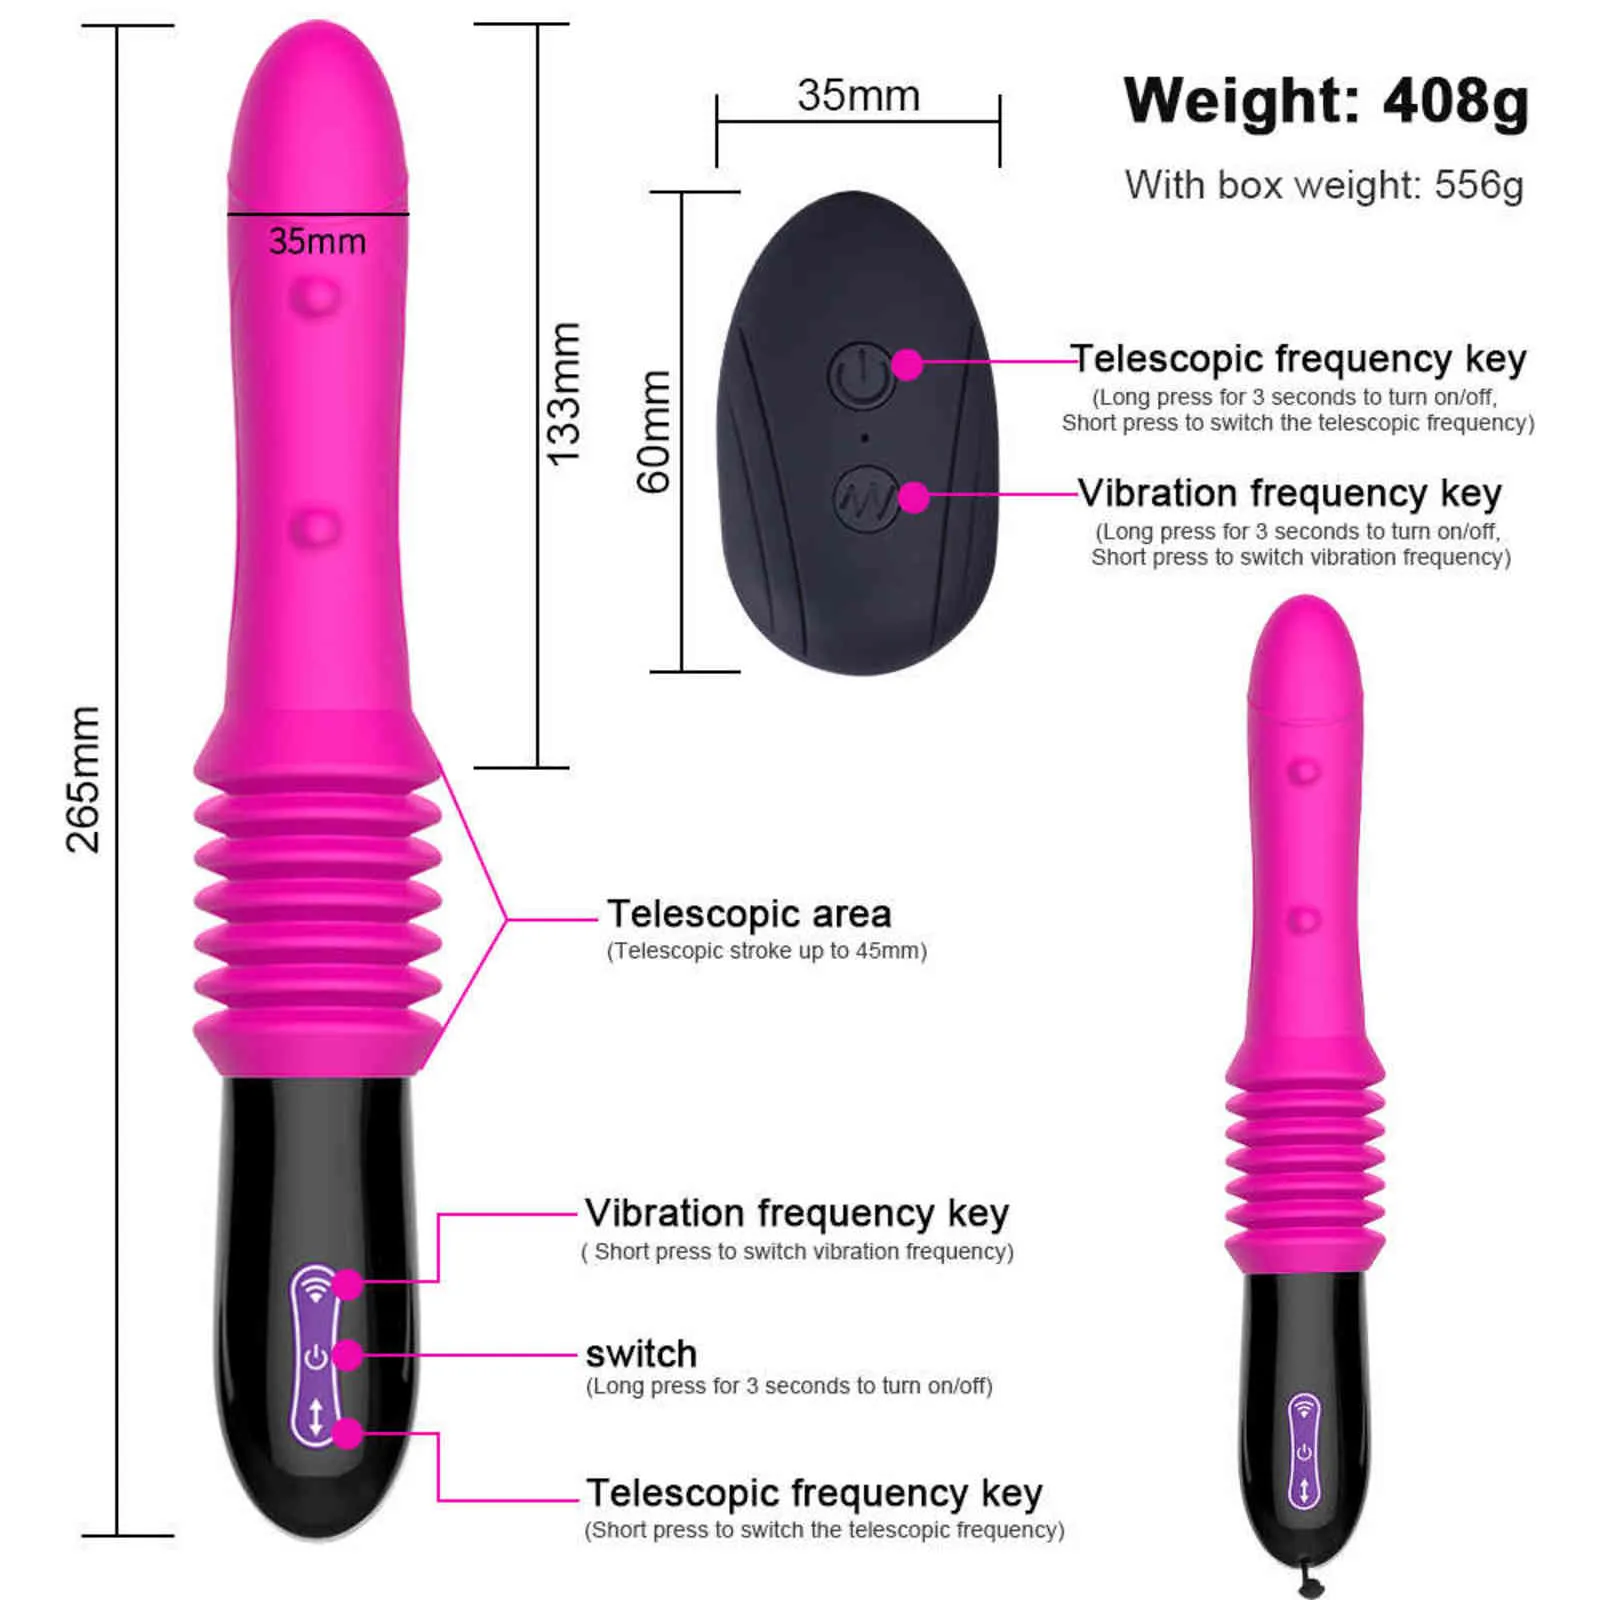 Nxy Vibrators Sex Thrusting Dildo Automatic g Spot Suction Game for Women Fun Anal Massage Orgasm 11097899392